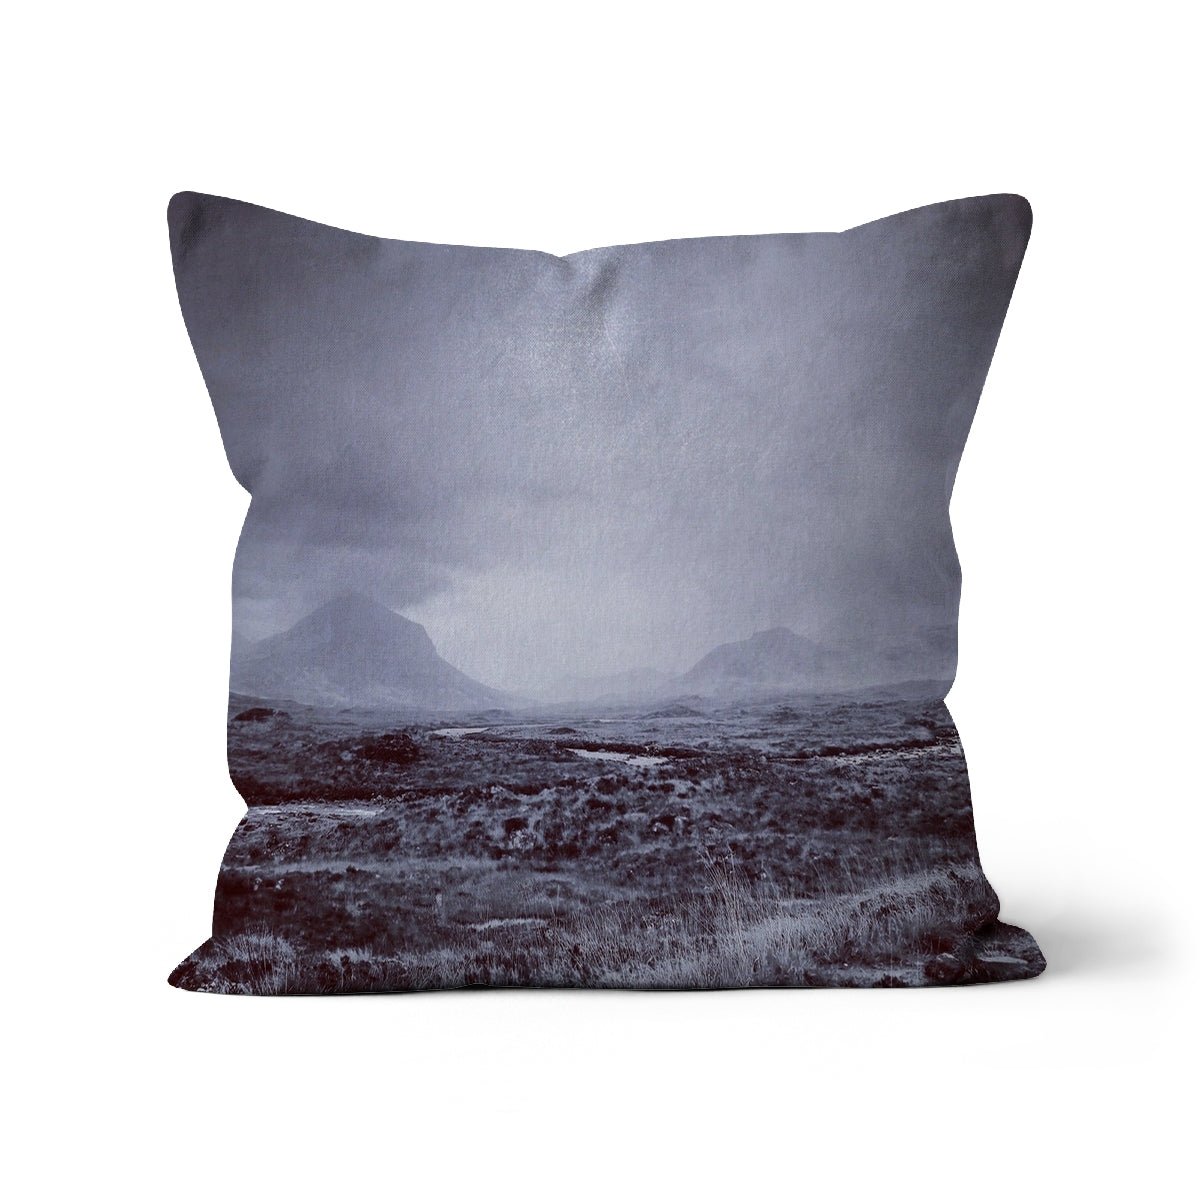 The Brooding Cuillin Skye Art Gifts Cushion-Cushions-Skye Art Gallery-Linen-24"x24"-Paintings, Prints, Homeware, Art Gifts From Scotland By Scottish Artist Kevin Hunter